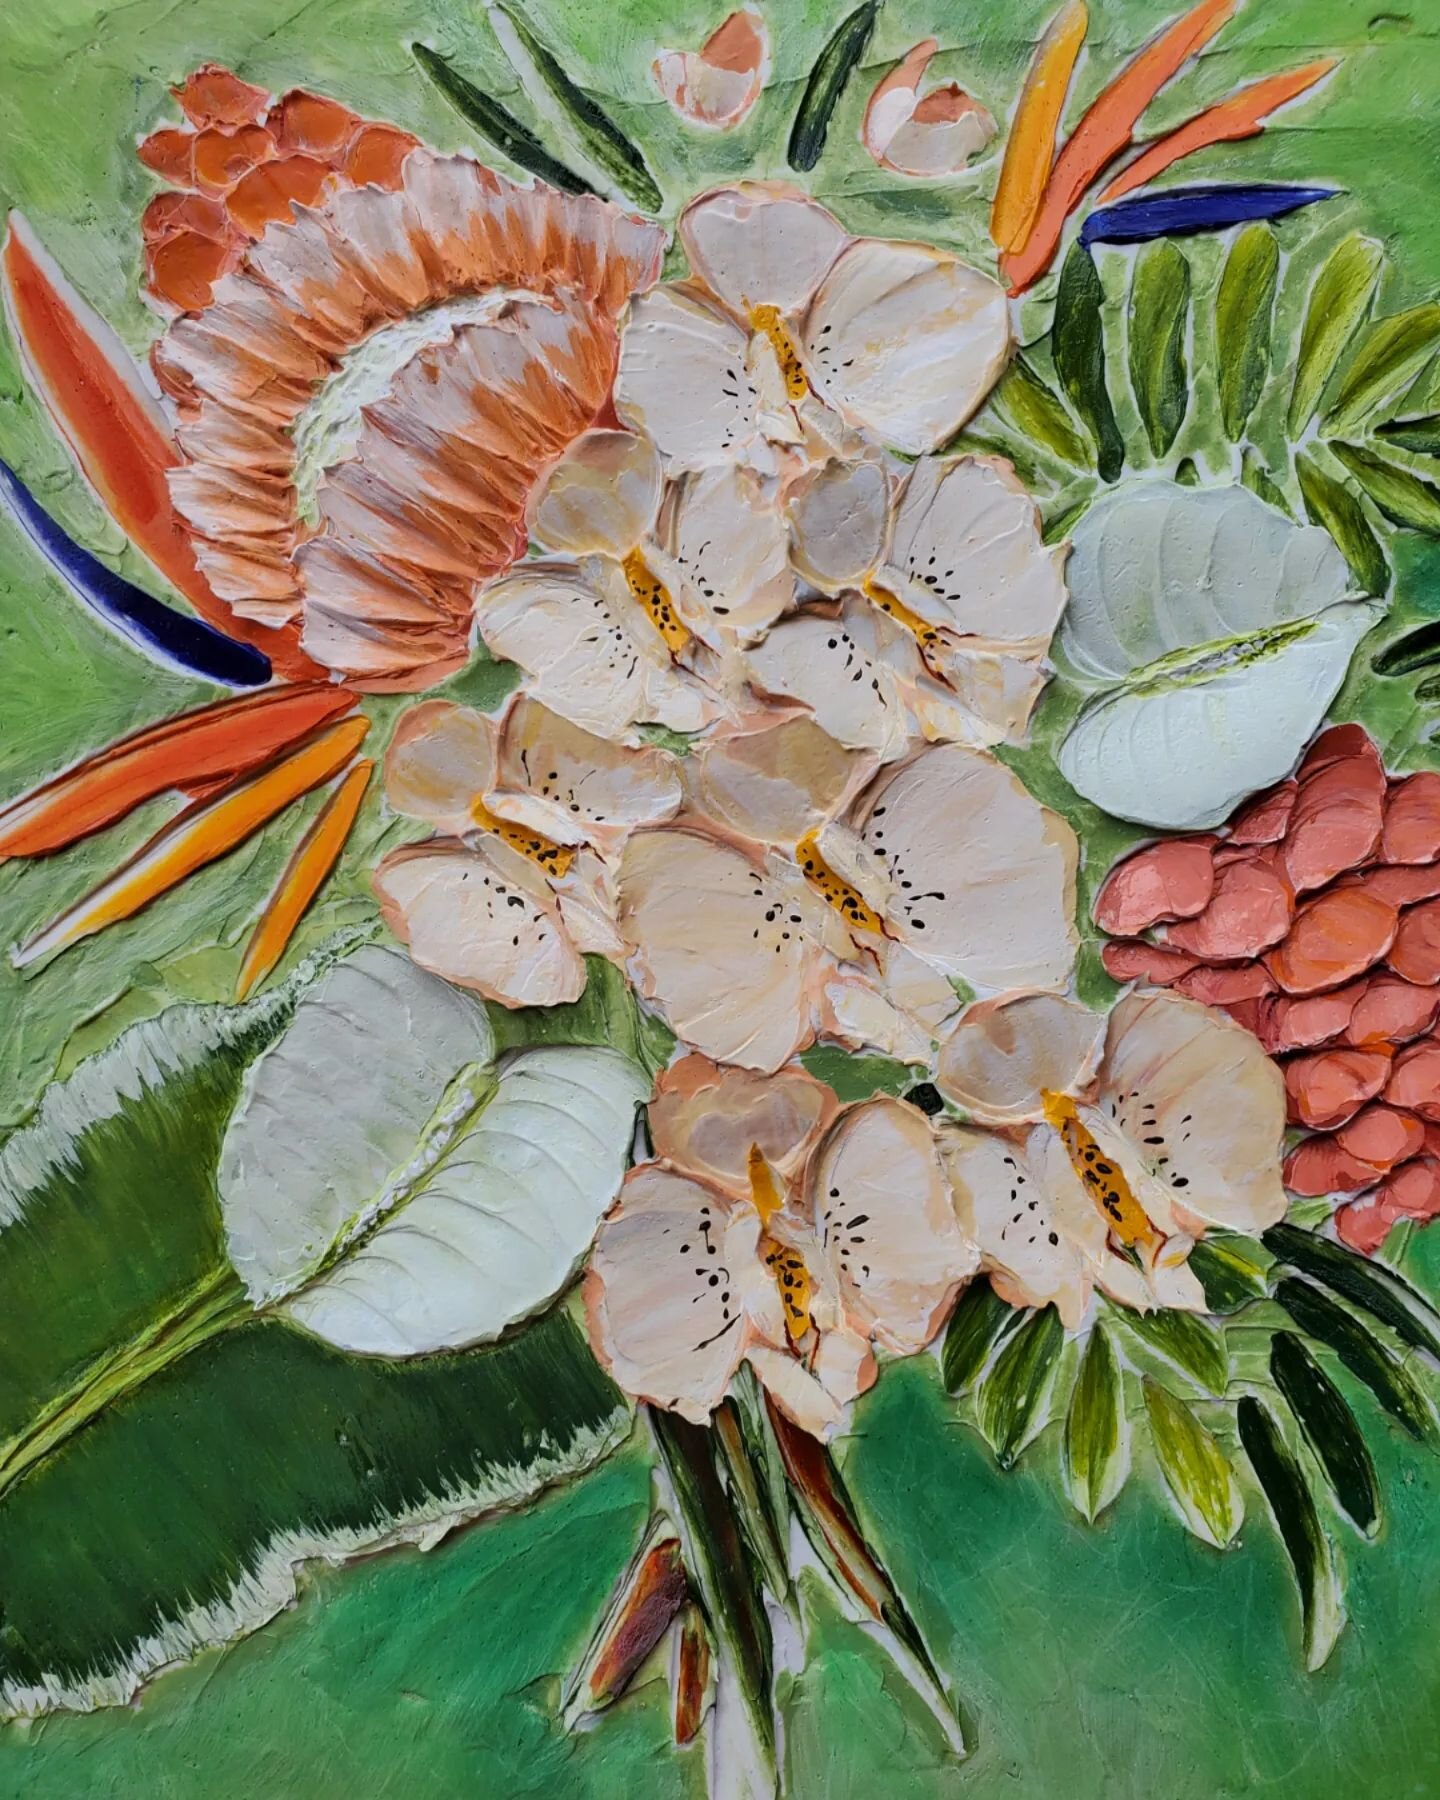 She's finished! And breathtakingly beautiful...

Feels like pure Florida- lush, tropical, bright and sultry. Miami nights or Key West mornings...

The King Protea was added towards the end. Right on top of one of the Torch Ginger. I freaking love it 